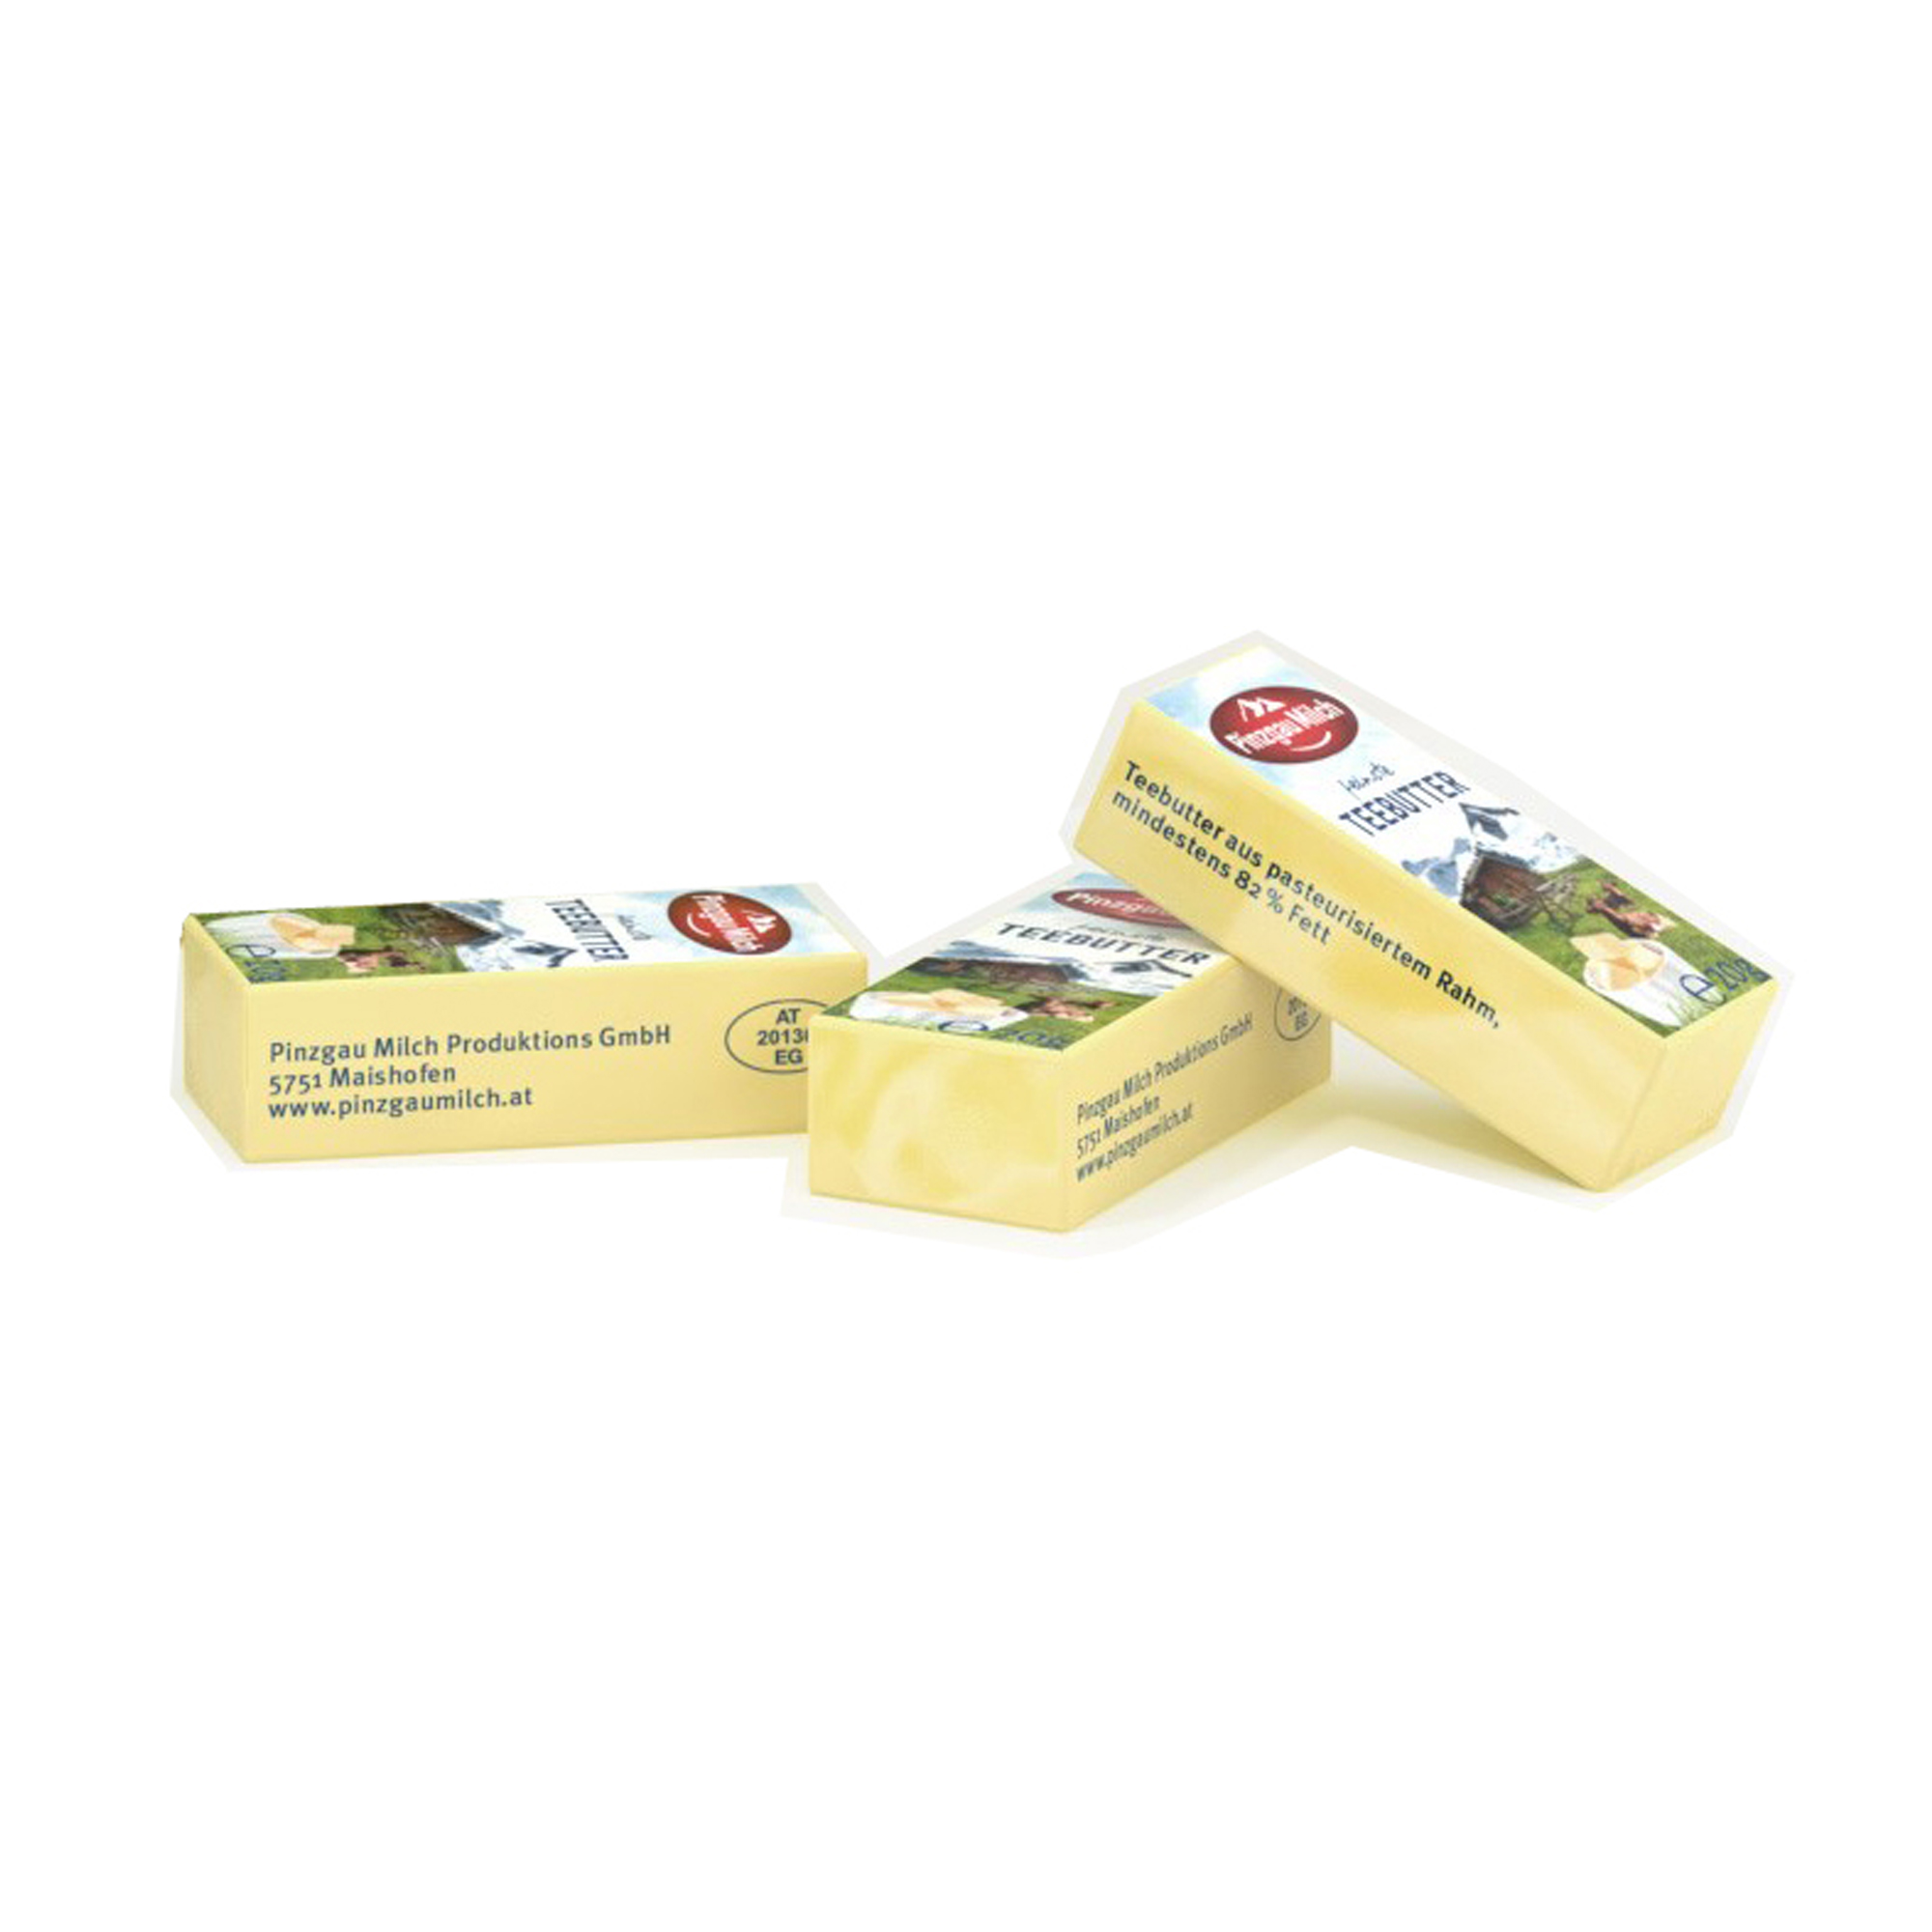 Very fine portion butter 20 g